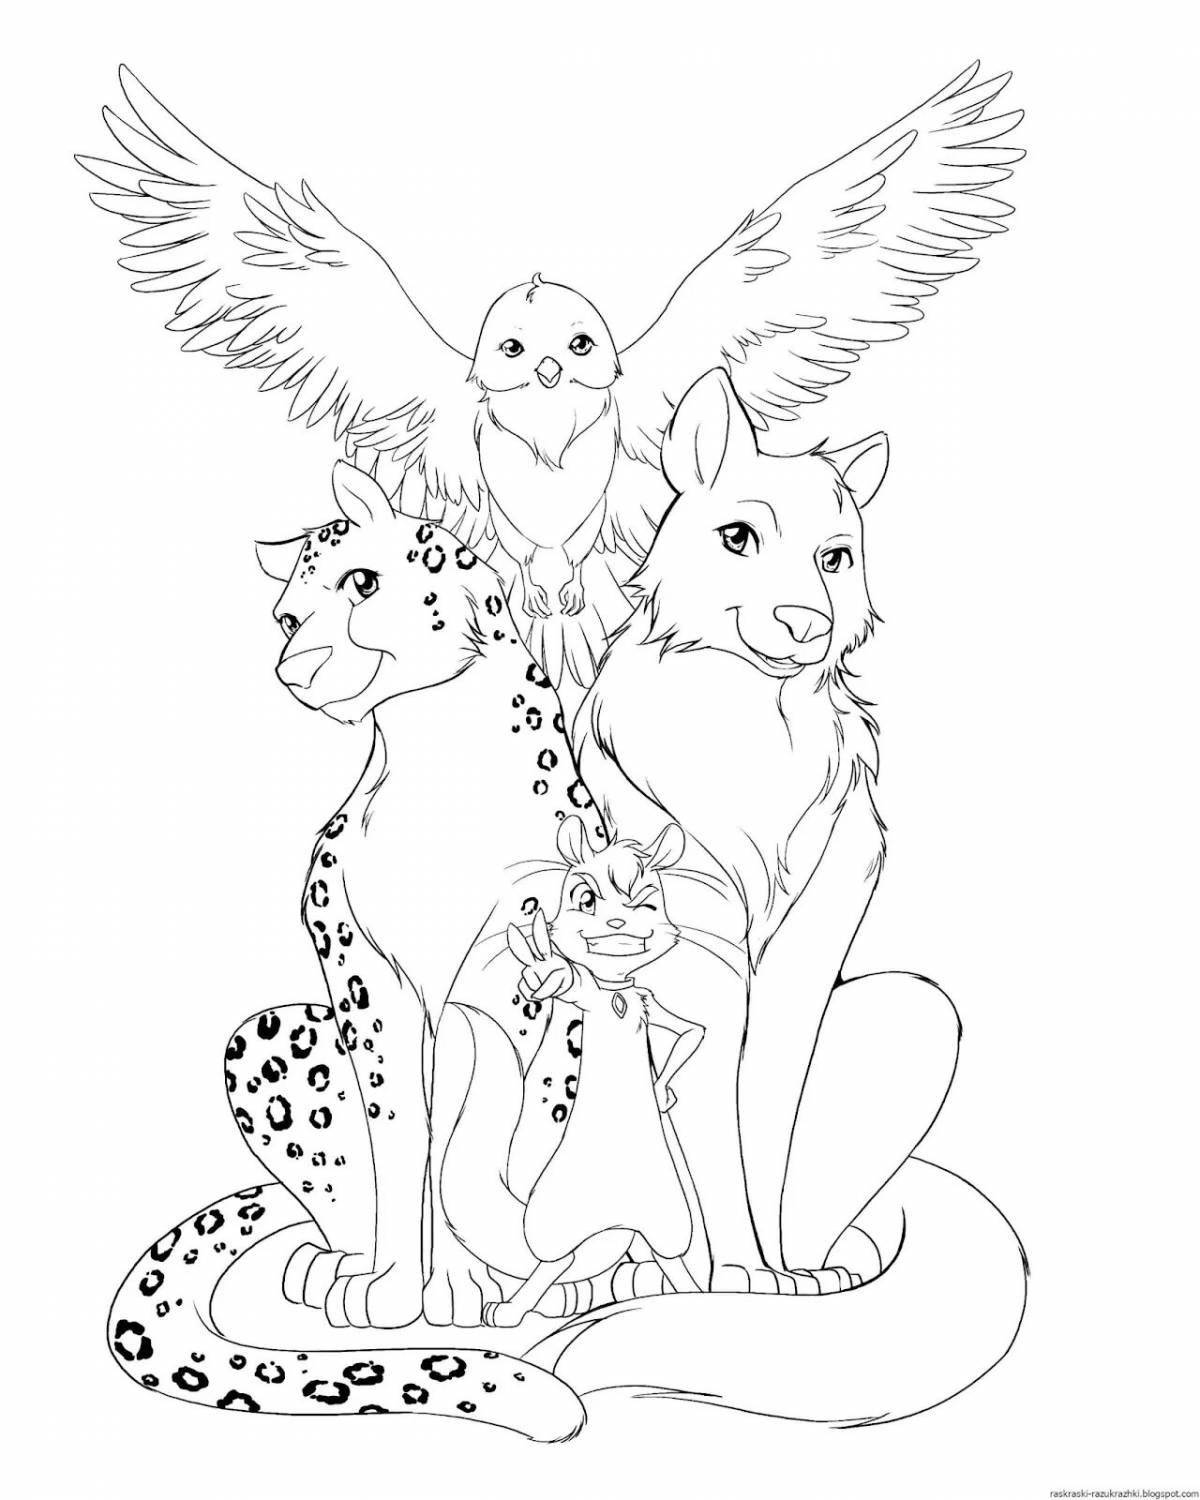 Amazing coloring pages for girls 11 years old with animals